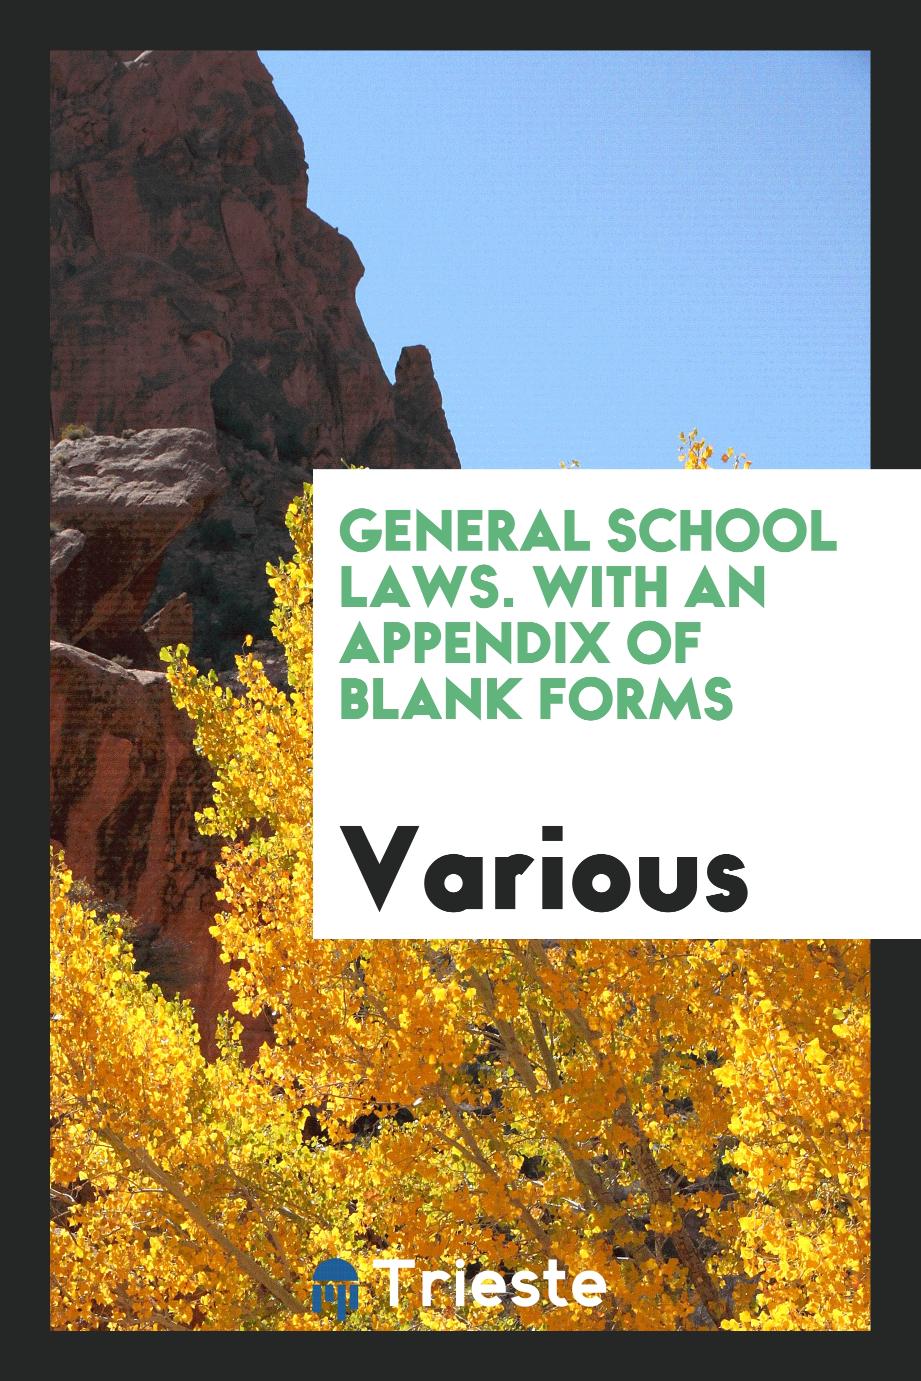 General school laws. With an appendix of blank forms